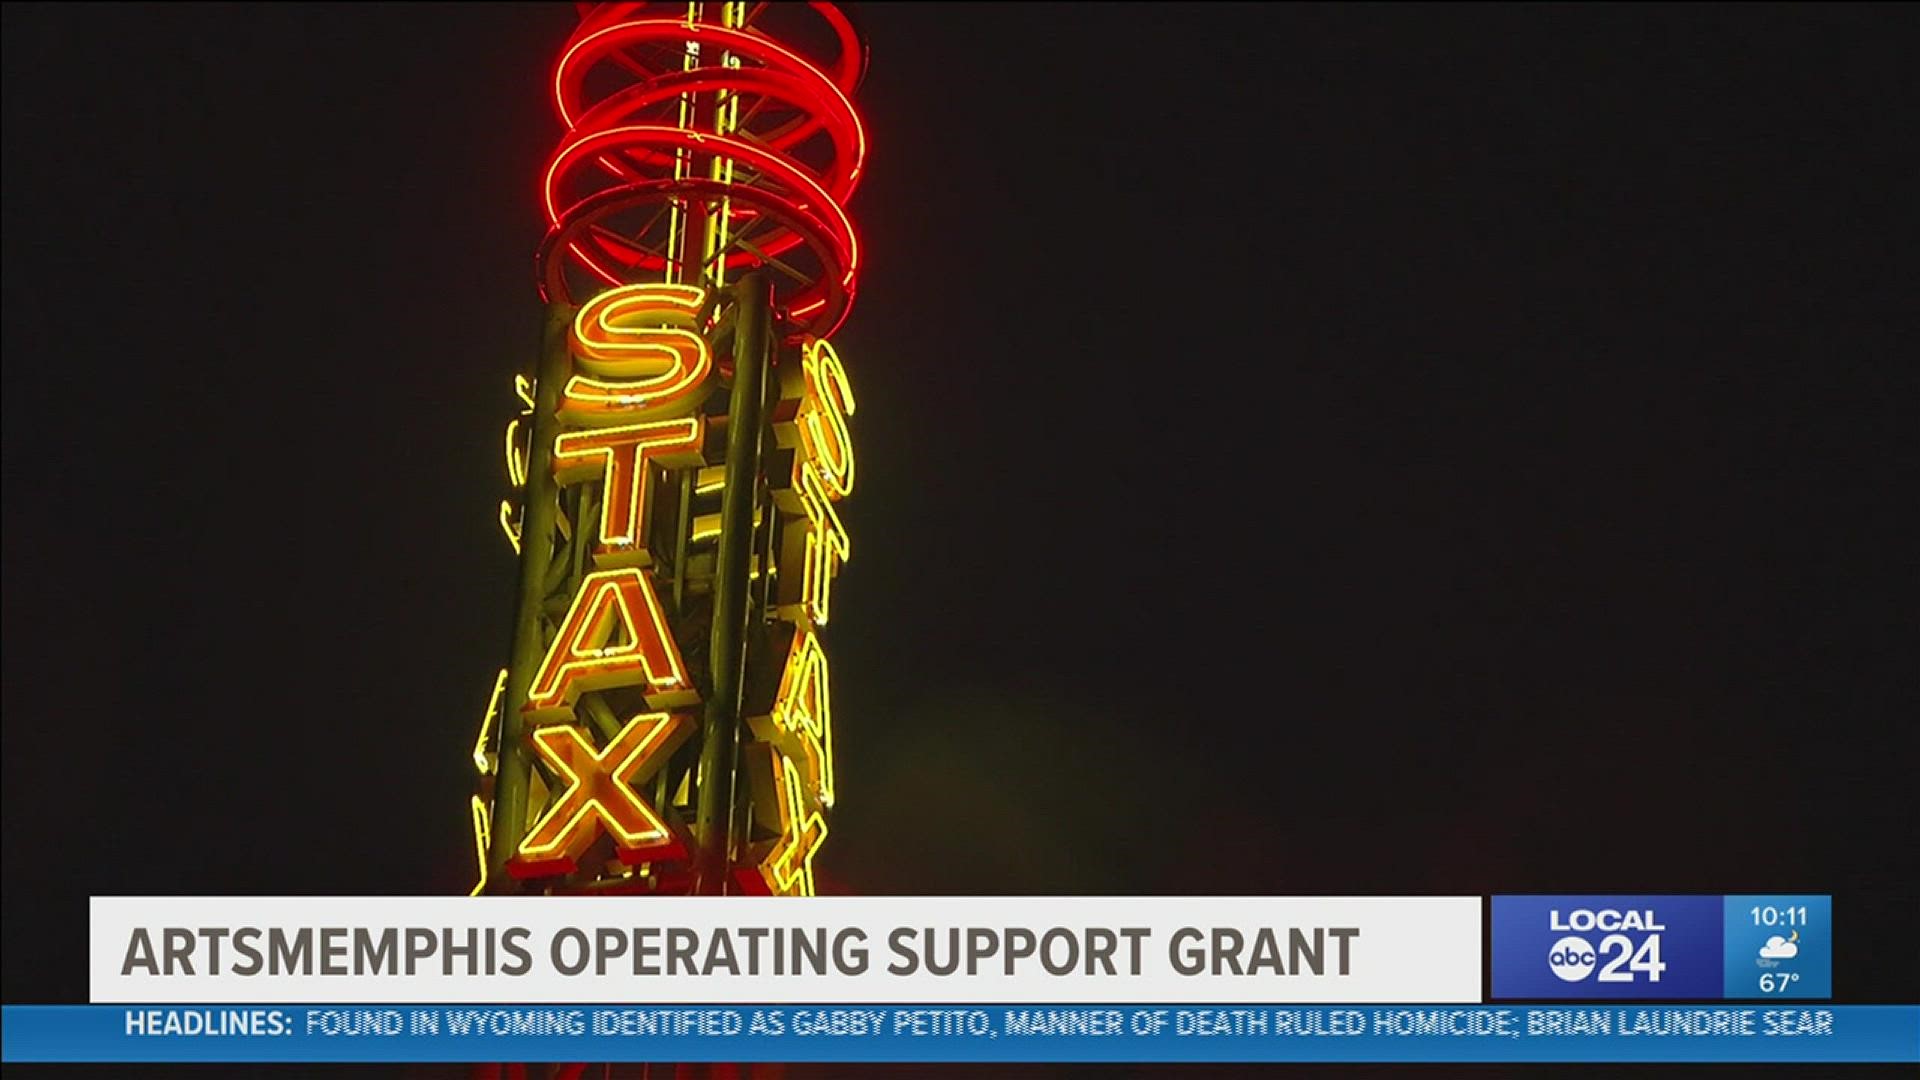 ArtsMemphis Operating Support grant is aimed to help organizations with general operations costs